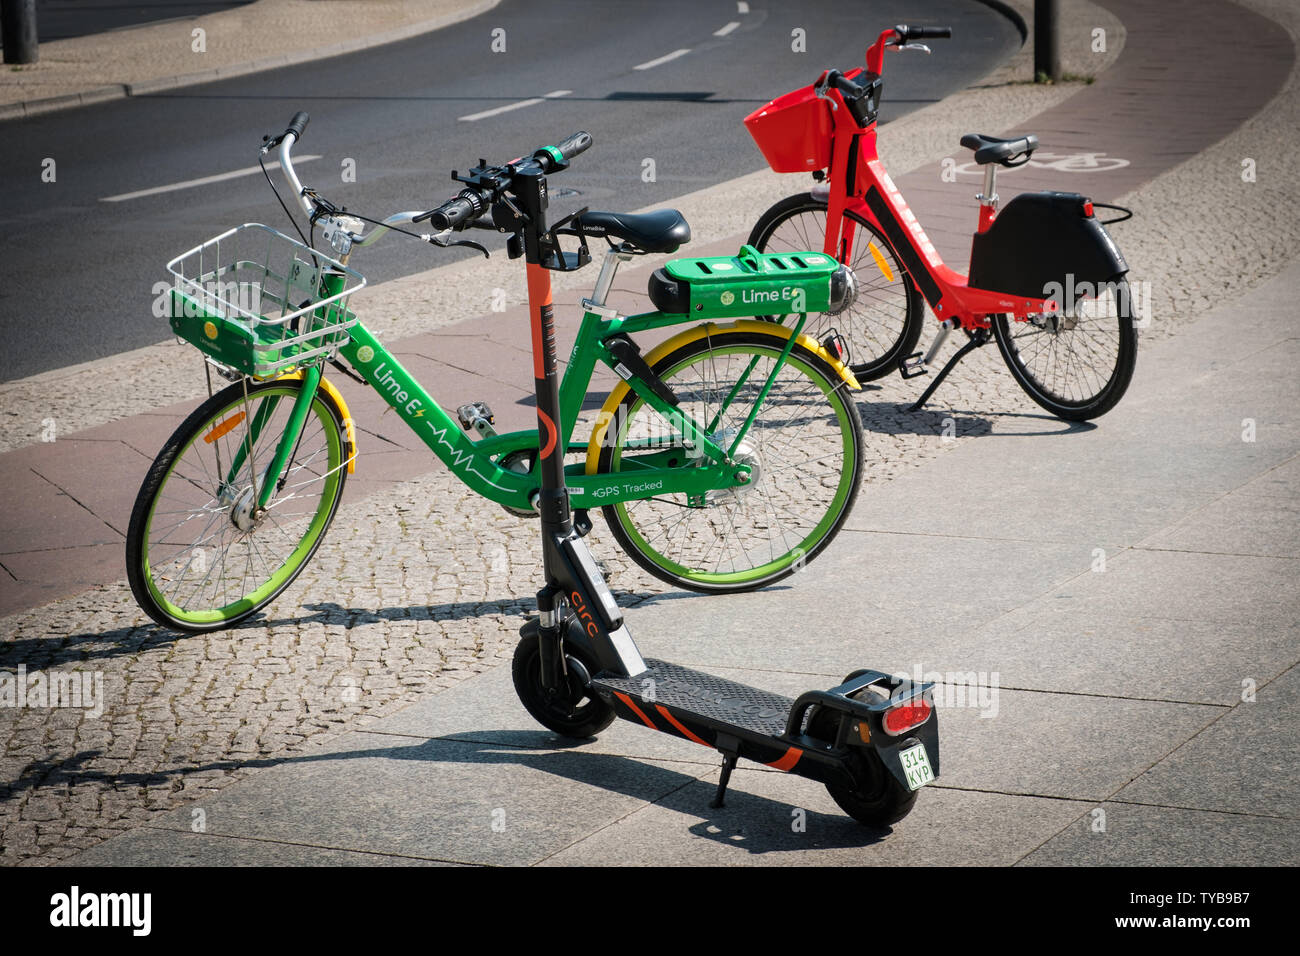 Berlin, Germany - June, 2019: Bike sharing bicycles and electric scooter , escooter or e-scooter on sidewalk in Berlin, Germany Stock Photo